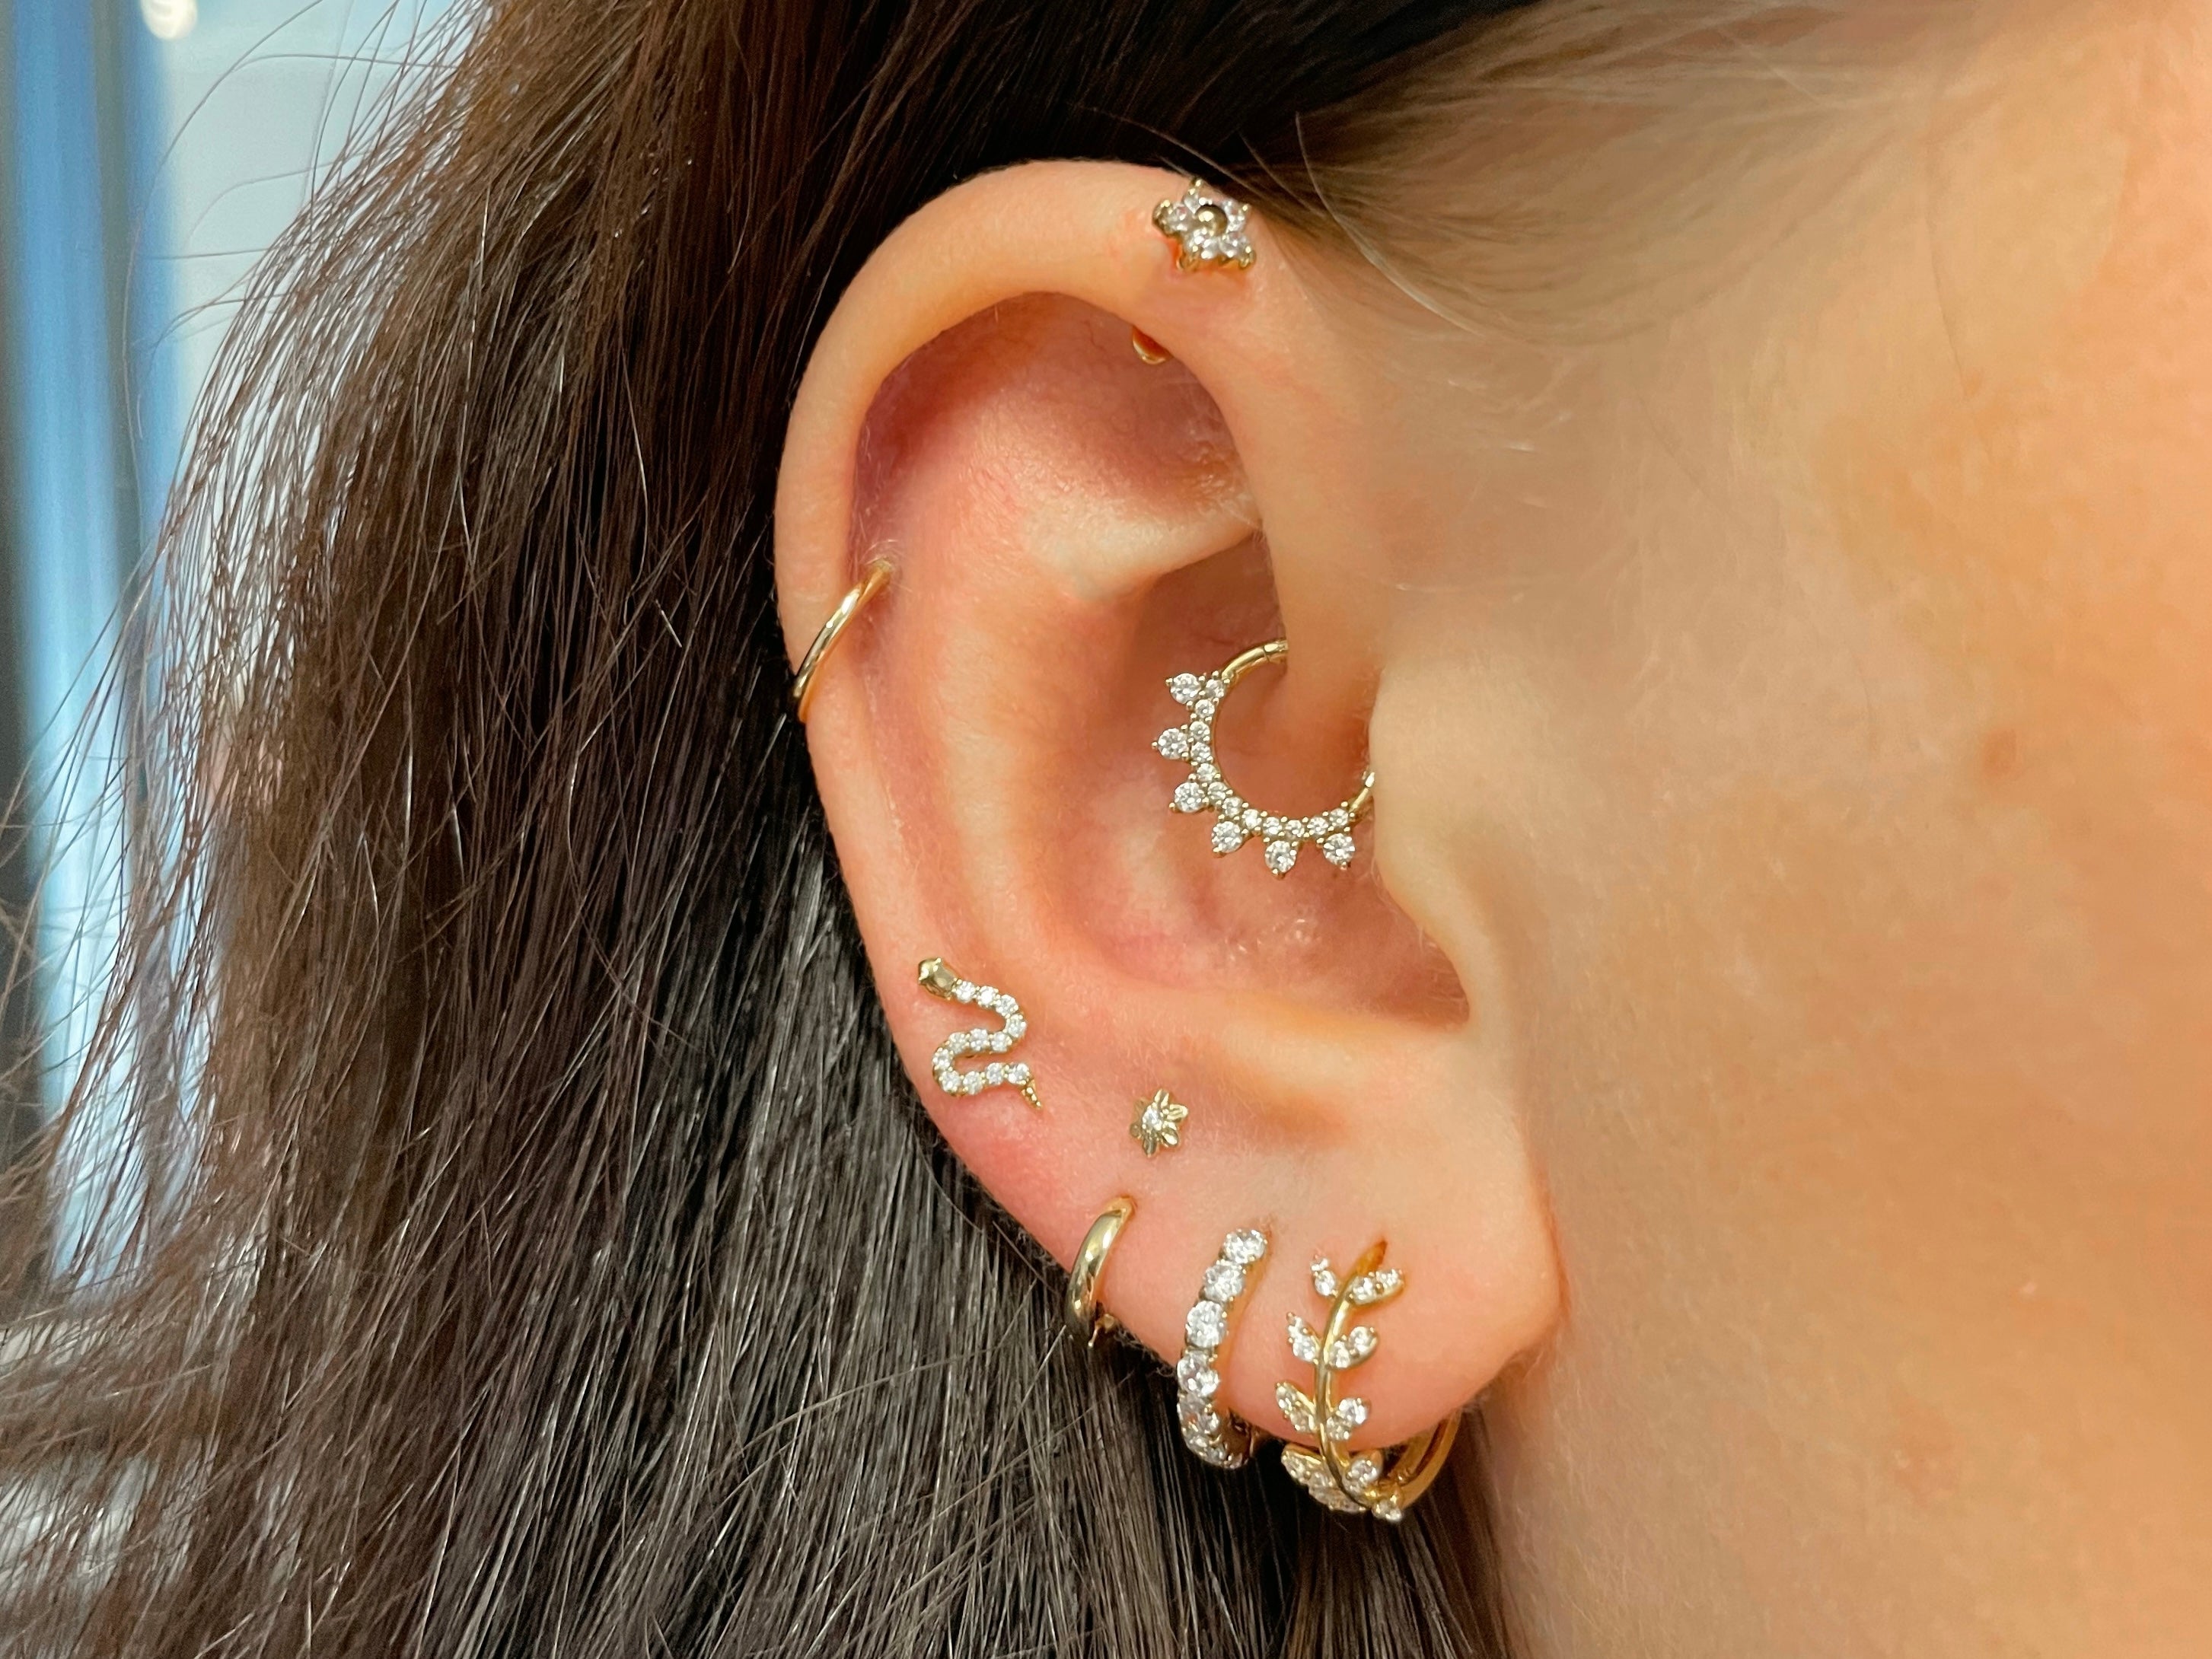 Looking for new piercing ideas! Both ears are pretty similar